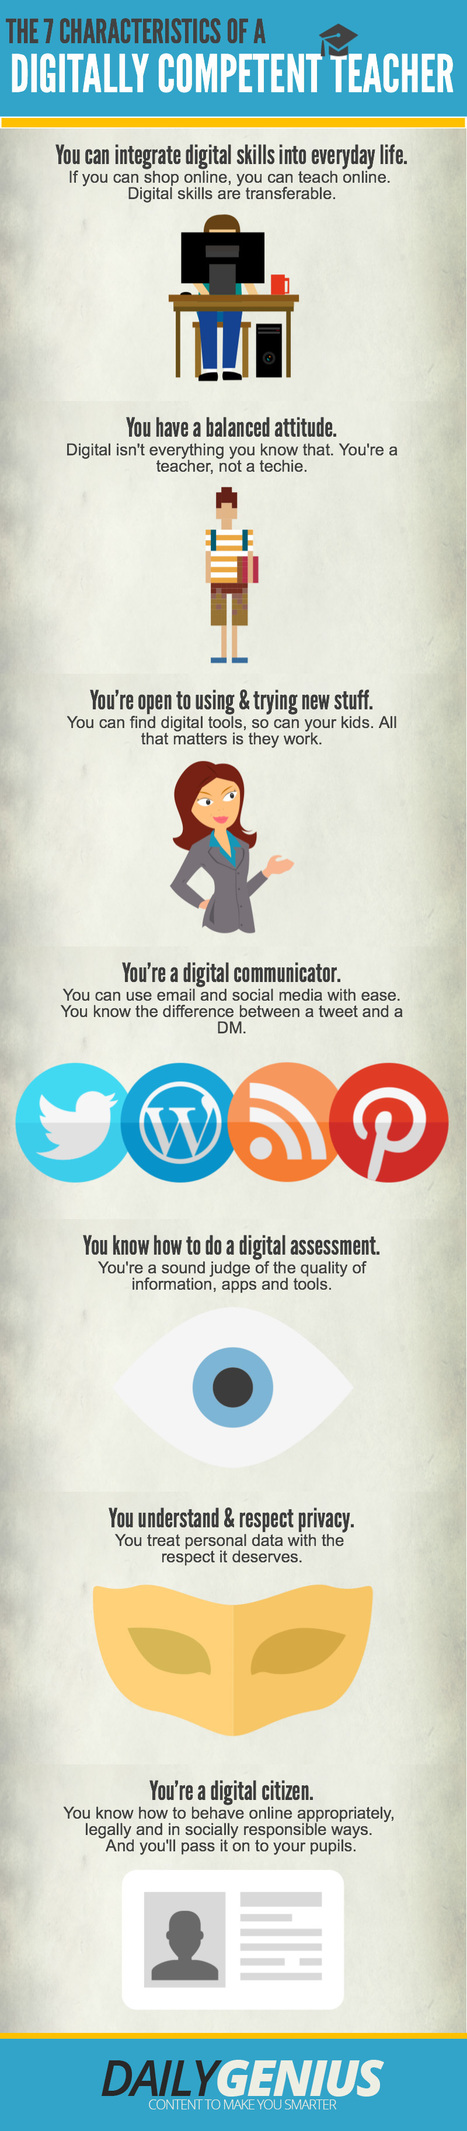 The Characteristics of a Digitally Competent Teacher Infographic - e-Learning Infographics | Education 2.0 & 3.0 | Scoop.it